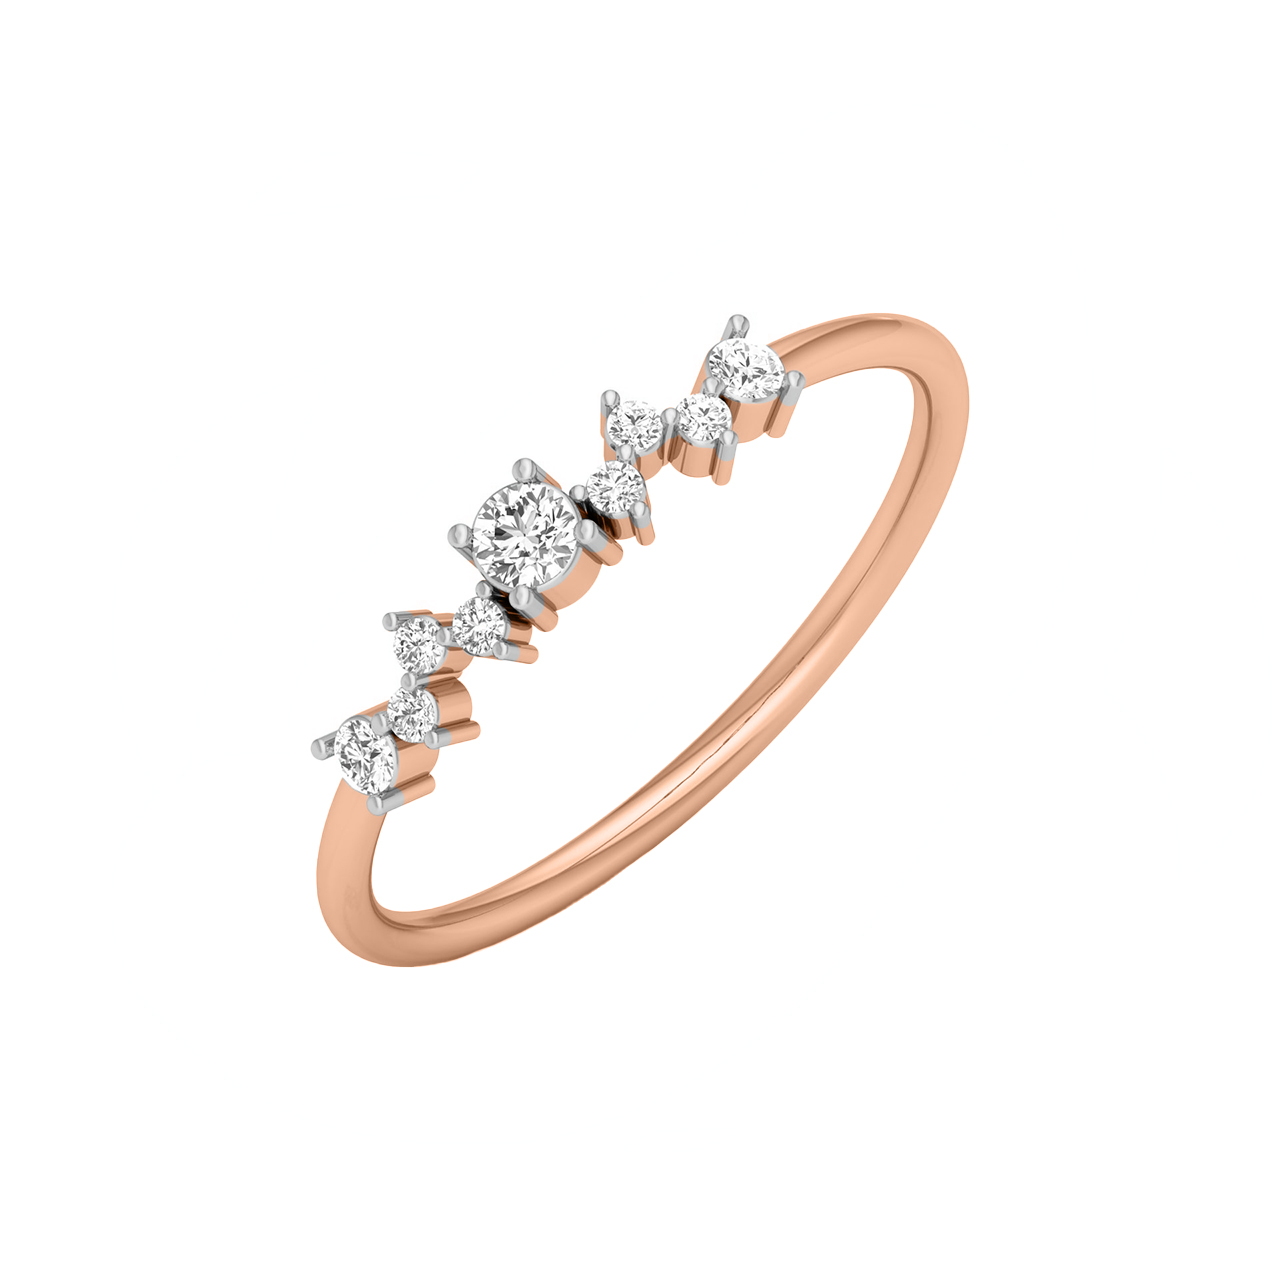 Redline Jewerly - Illusion - String Ring with 0.05ct Round Diamond in Rose  Gold Cluster Setting - Redline